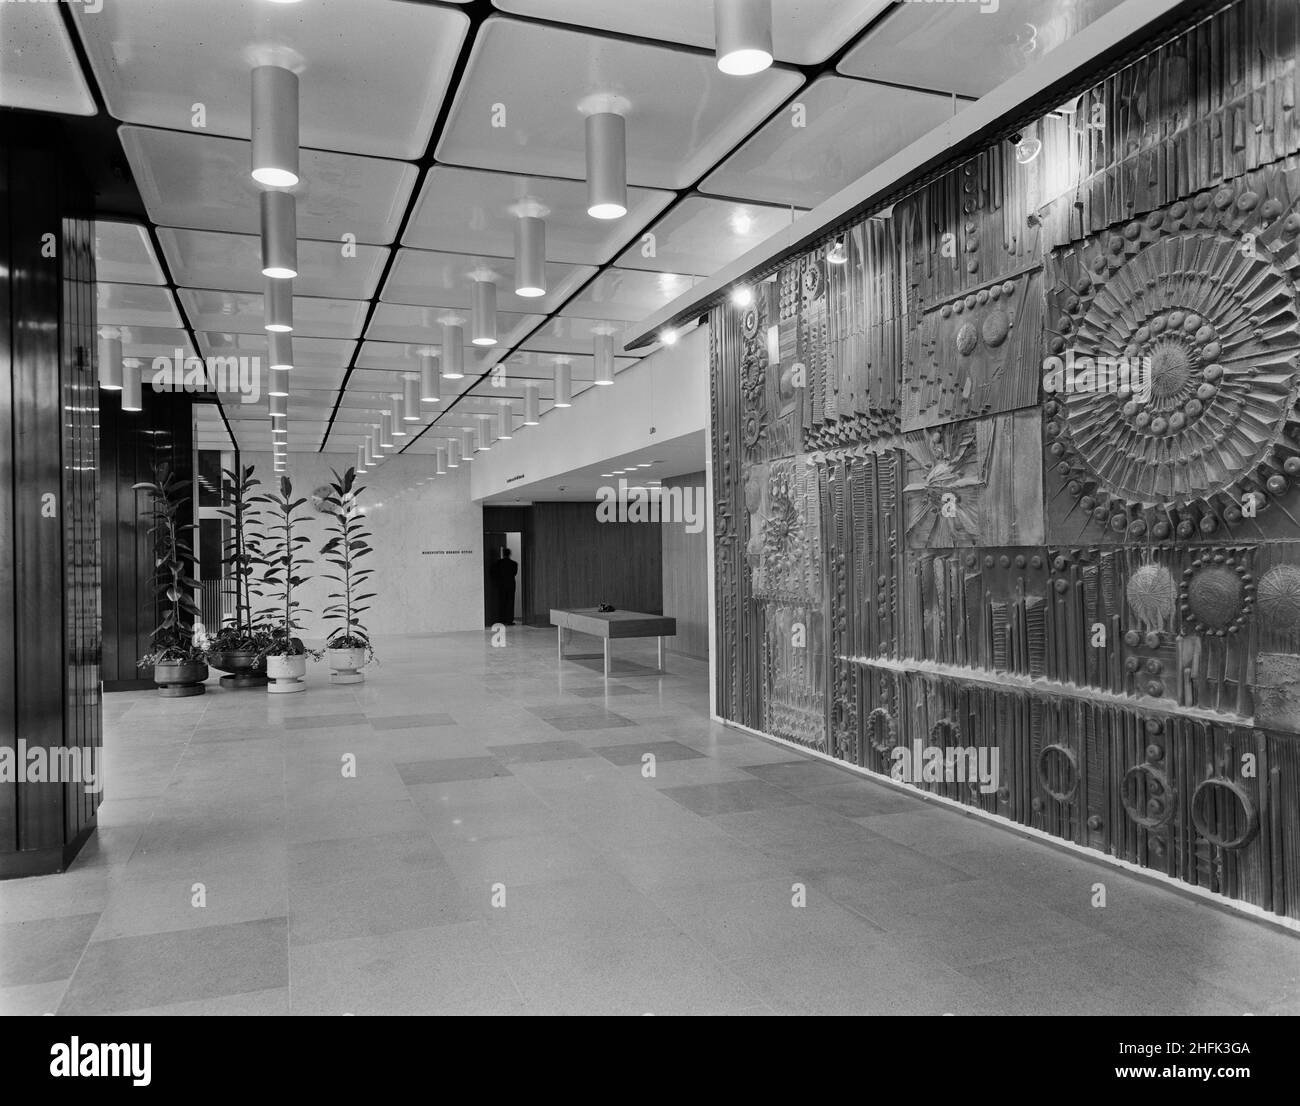 CIS Building, Cooperative Insurance Society Tower, Miller Street, Manchester, 16/10/1962. The main entrance foyer featuring an abstract wall mural in the Co-operative Insurance Society (CIS) Building in Manchester. In 1959, the Laing Company began work on the construction of two office blocks for the Co-operative Society in Manchester. The Co-operative Insurance Society (CIS) tower was over 350ft high when completed in 1962, and was the tallest office block in the country at the time. On an adjacent site, a smaller 14-storey high office block for the Co-operative Wholesale Society (CWS) was co Stock Photo